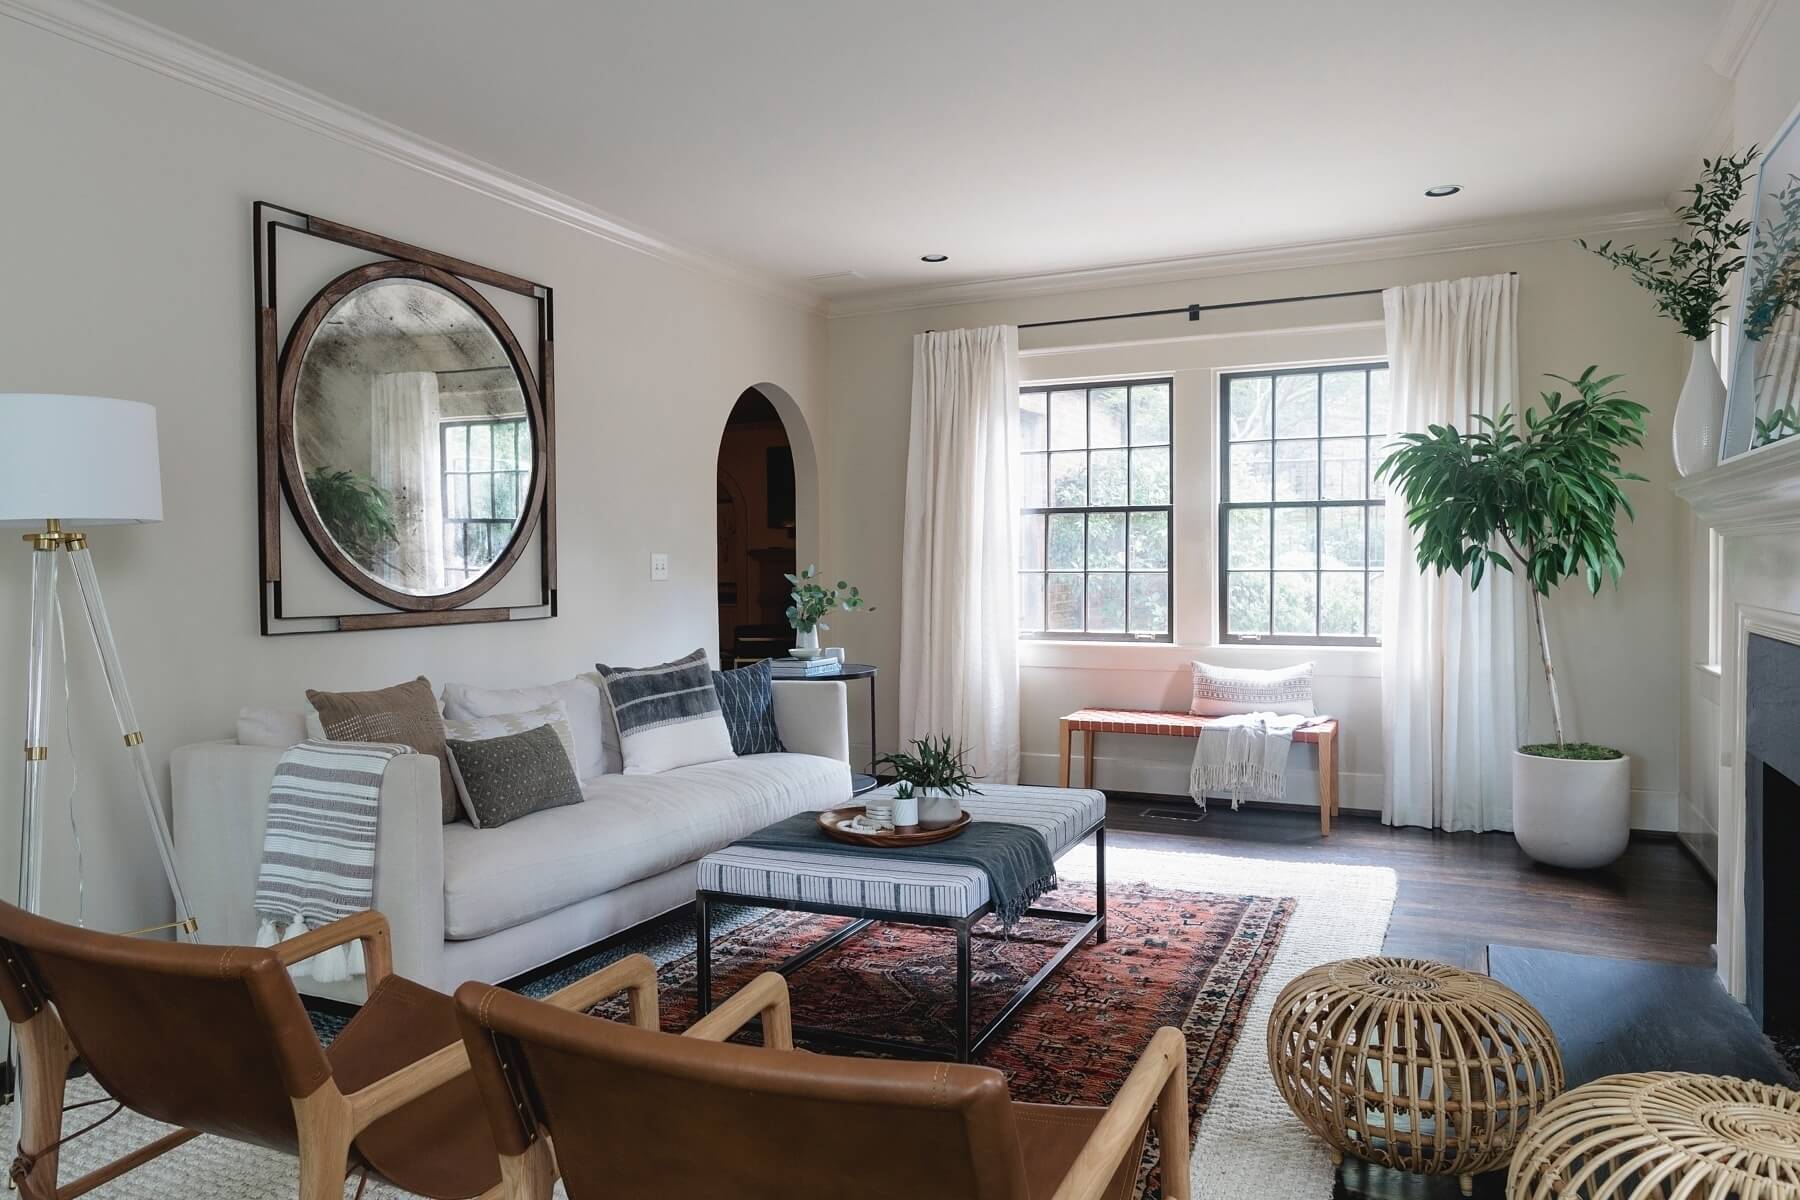 The "California Eclectic" feel comes through in this effortlessly chic living room. Image: Graham Yelton